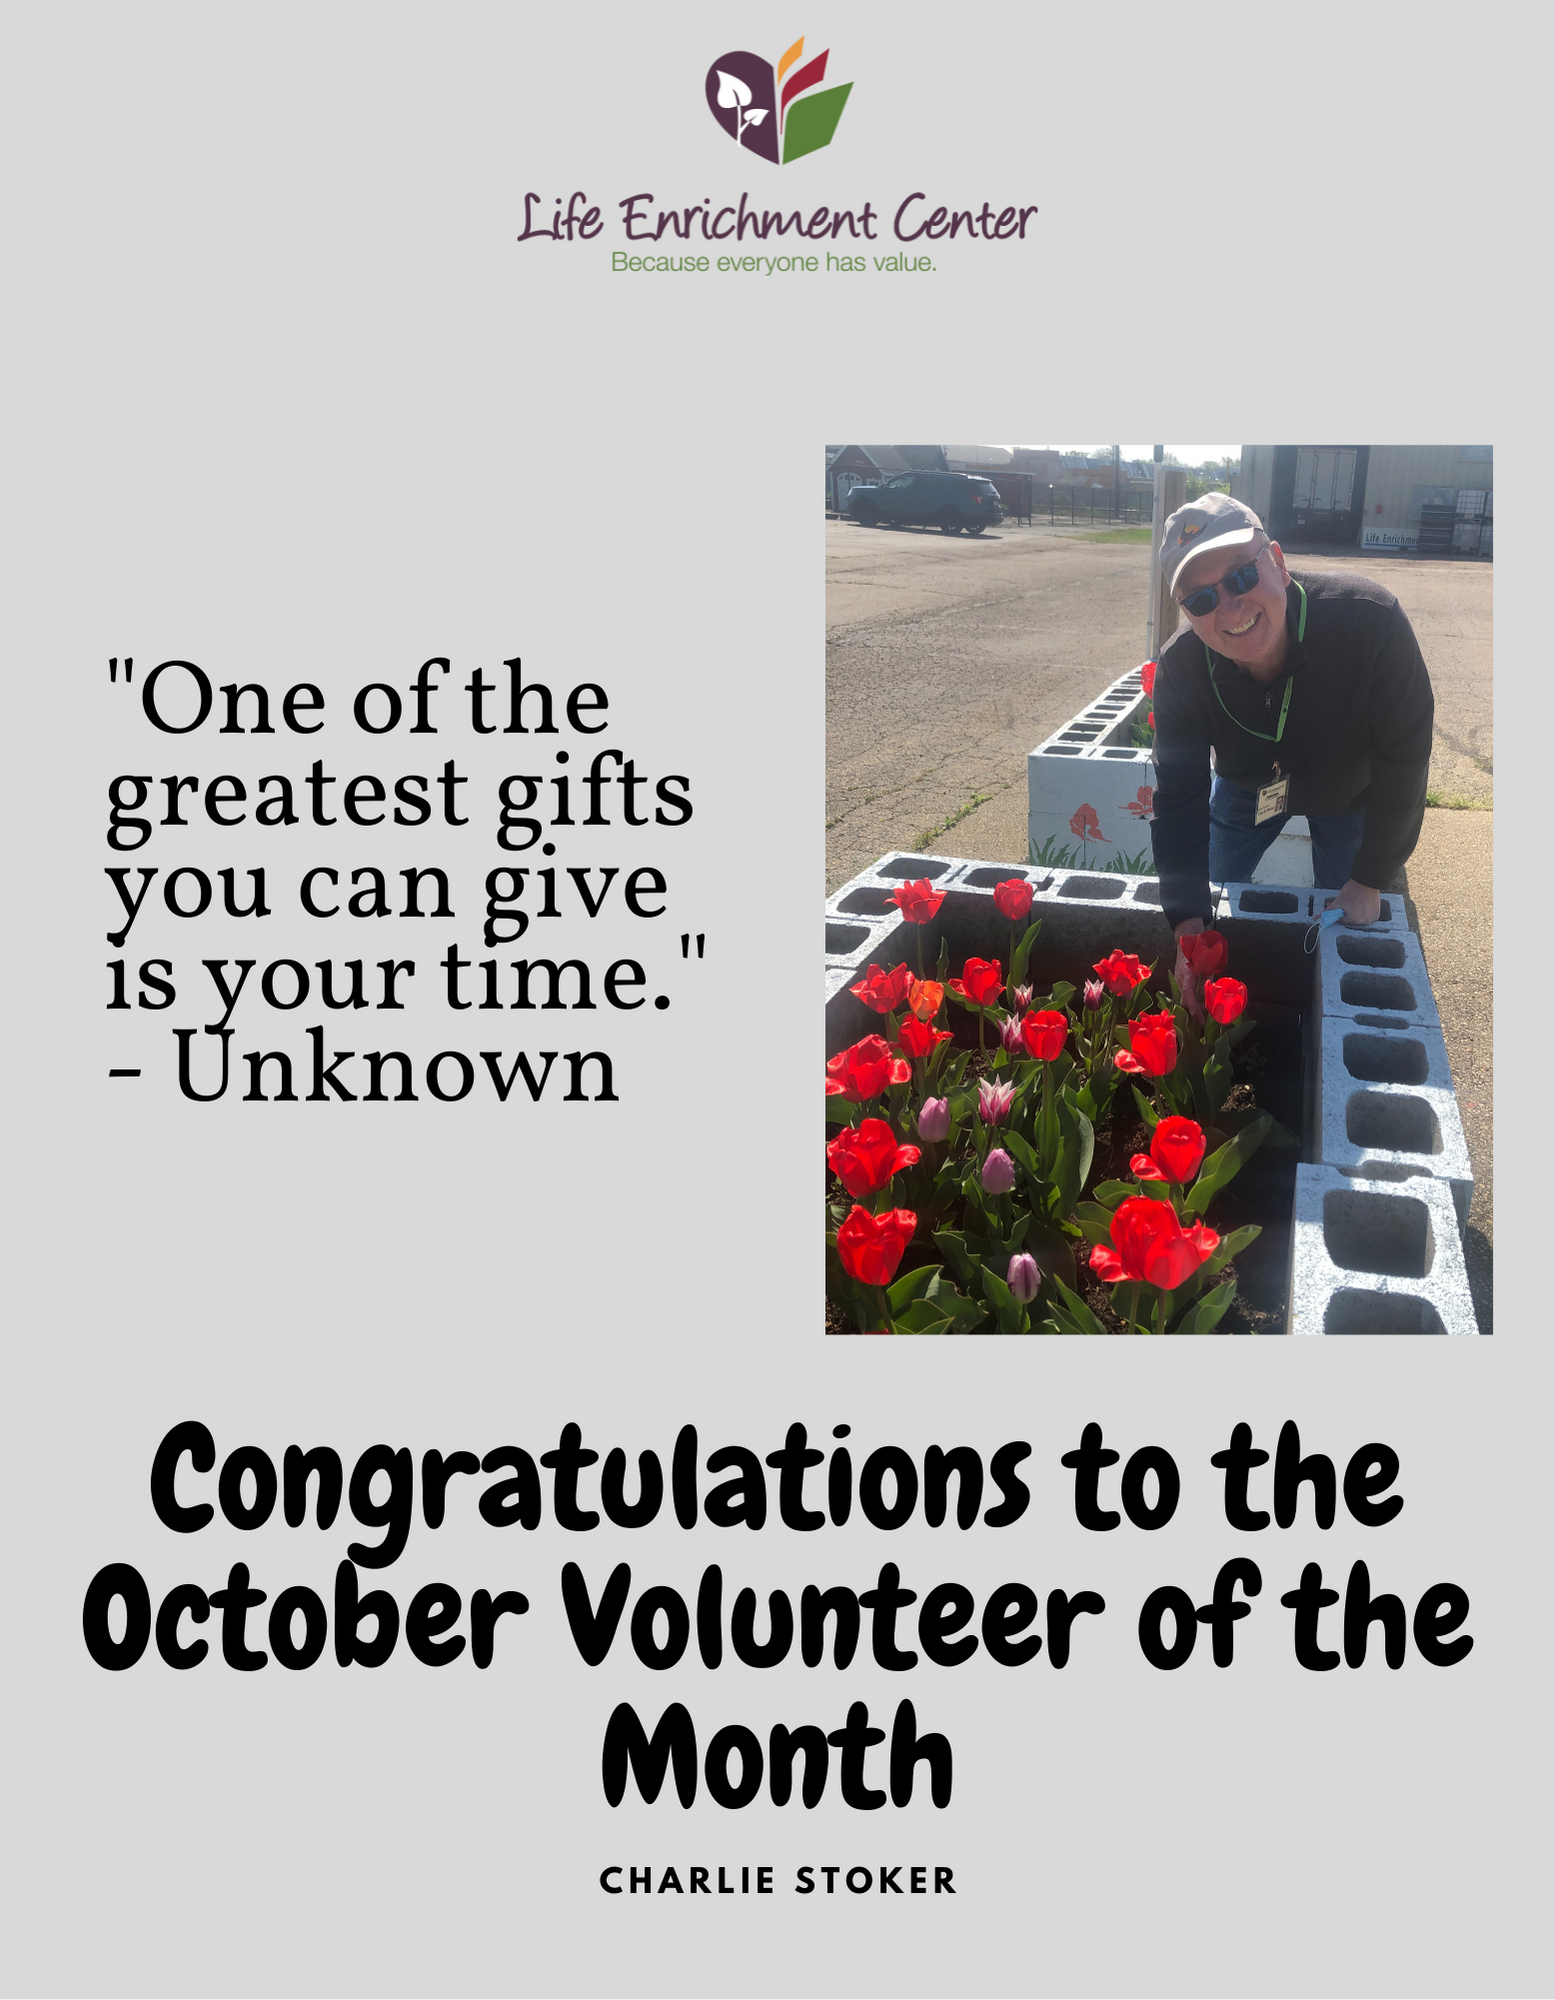 Congratulations to the October Volunteer of the month Charlie Stoker. "One of the greatest gifts you can give is your time." Unknown. Picture of Charlie Stoker bending over a raised garden bed of flowers in the community garden.